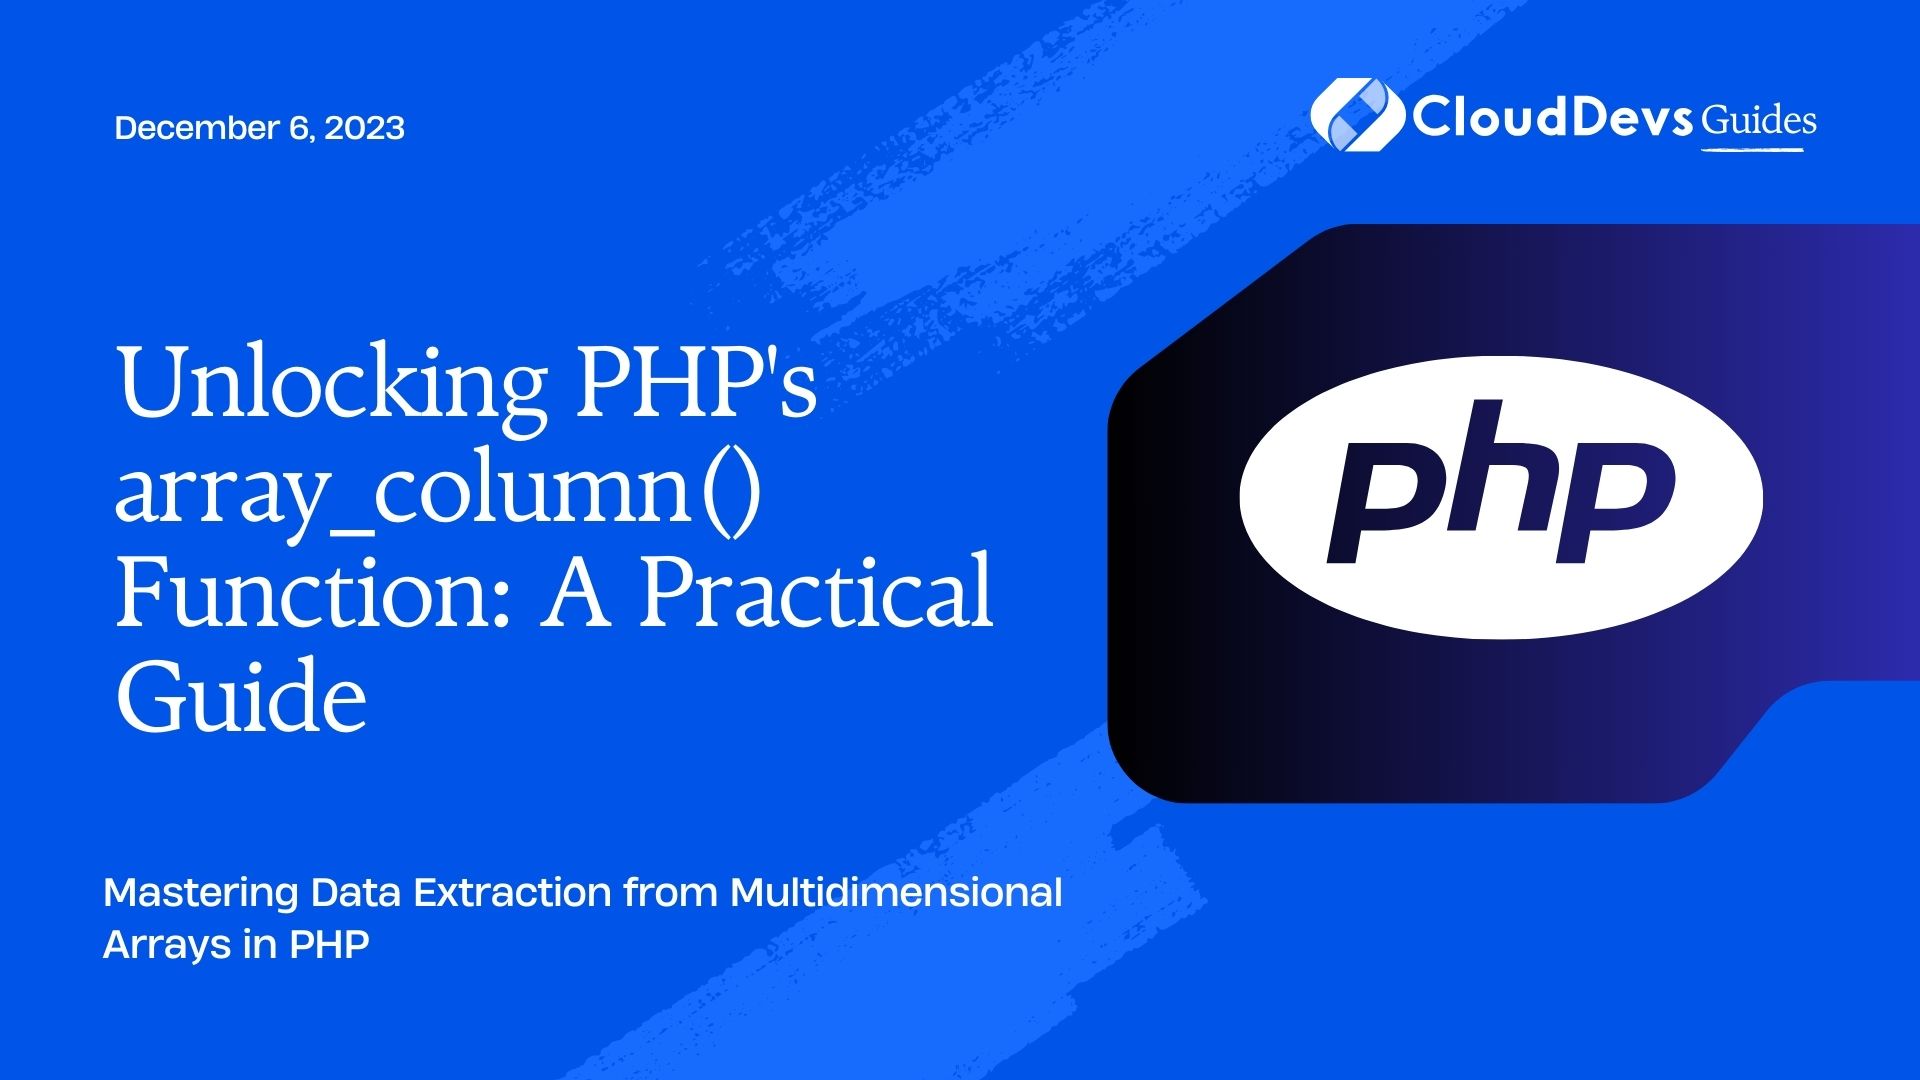 Unlocking PHP's array_column() Function: A Practical Guide